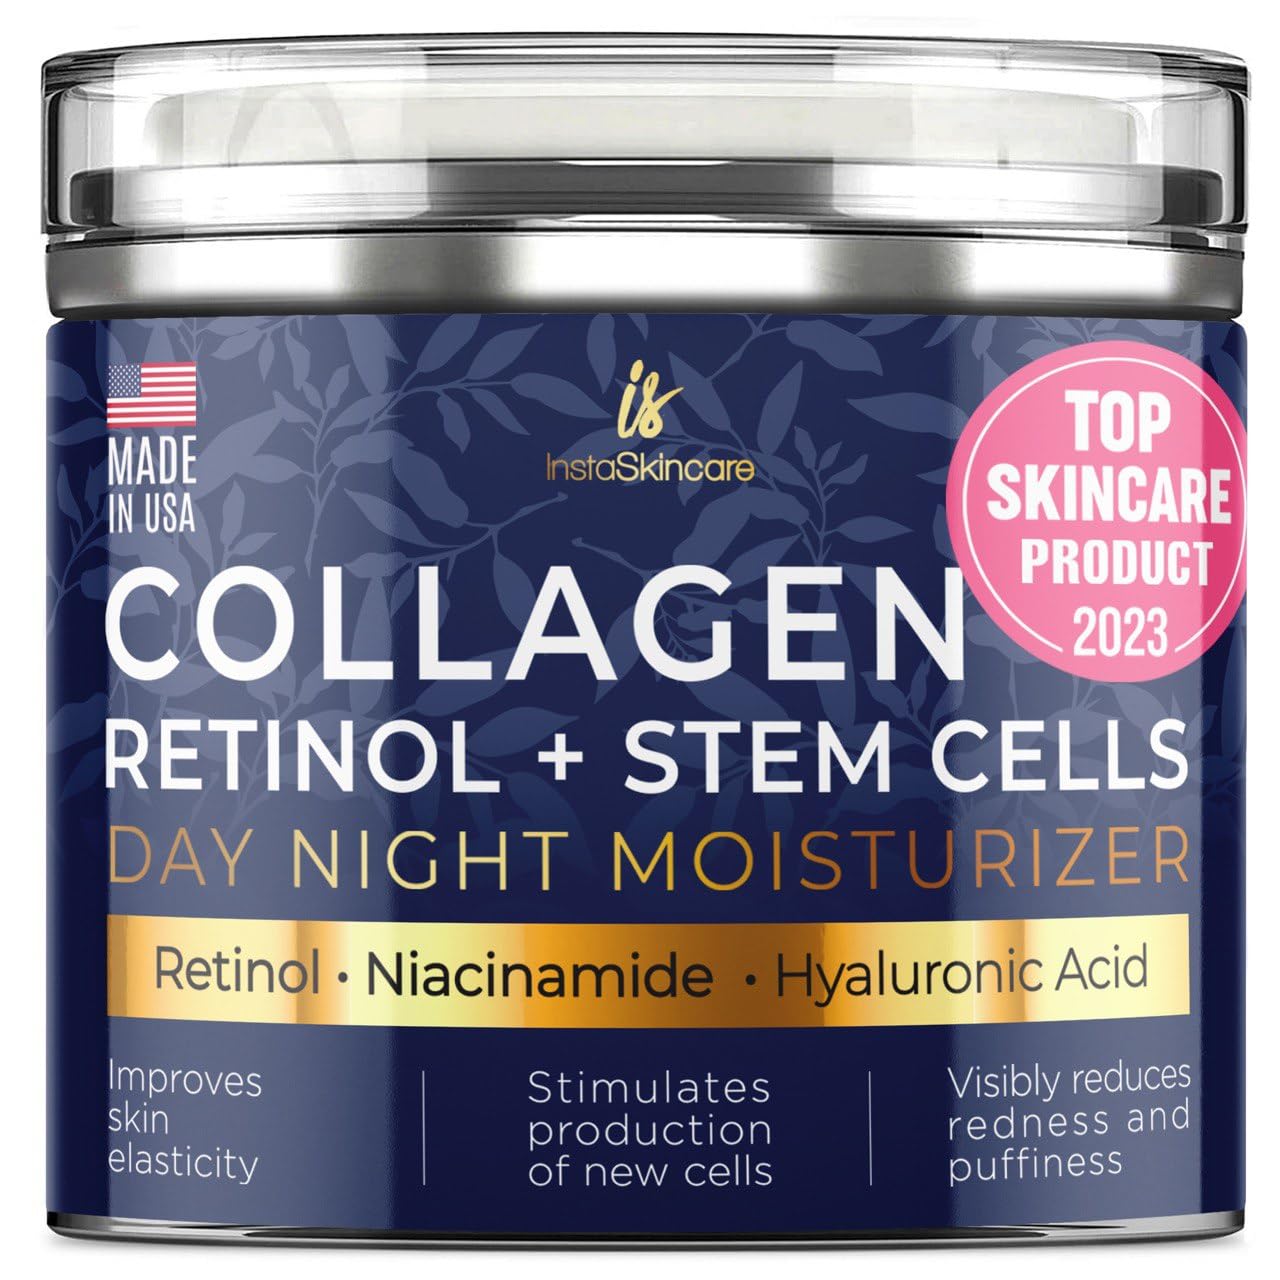 Collagen Face Moisturizer with Airless Pump - Collagen Botanical Stem Cells Cream for Skin with Retinol, Niacinamide, Hyaluronic Acid - Anti-Aging Day  Night Face Cream by InstaSkincare - Made in USA